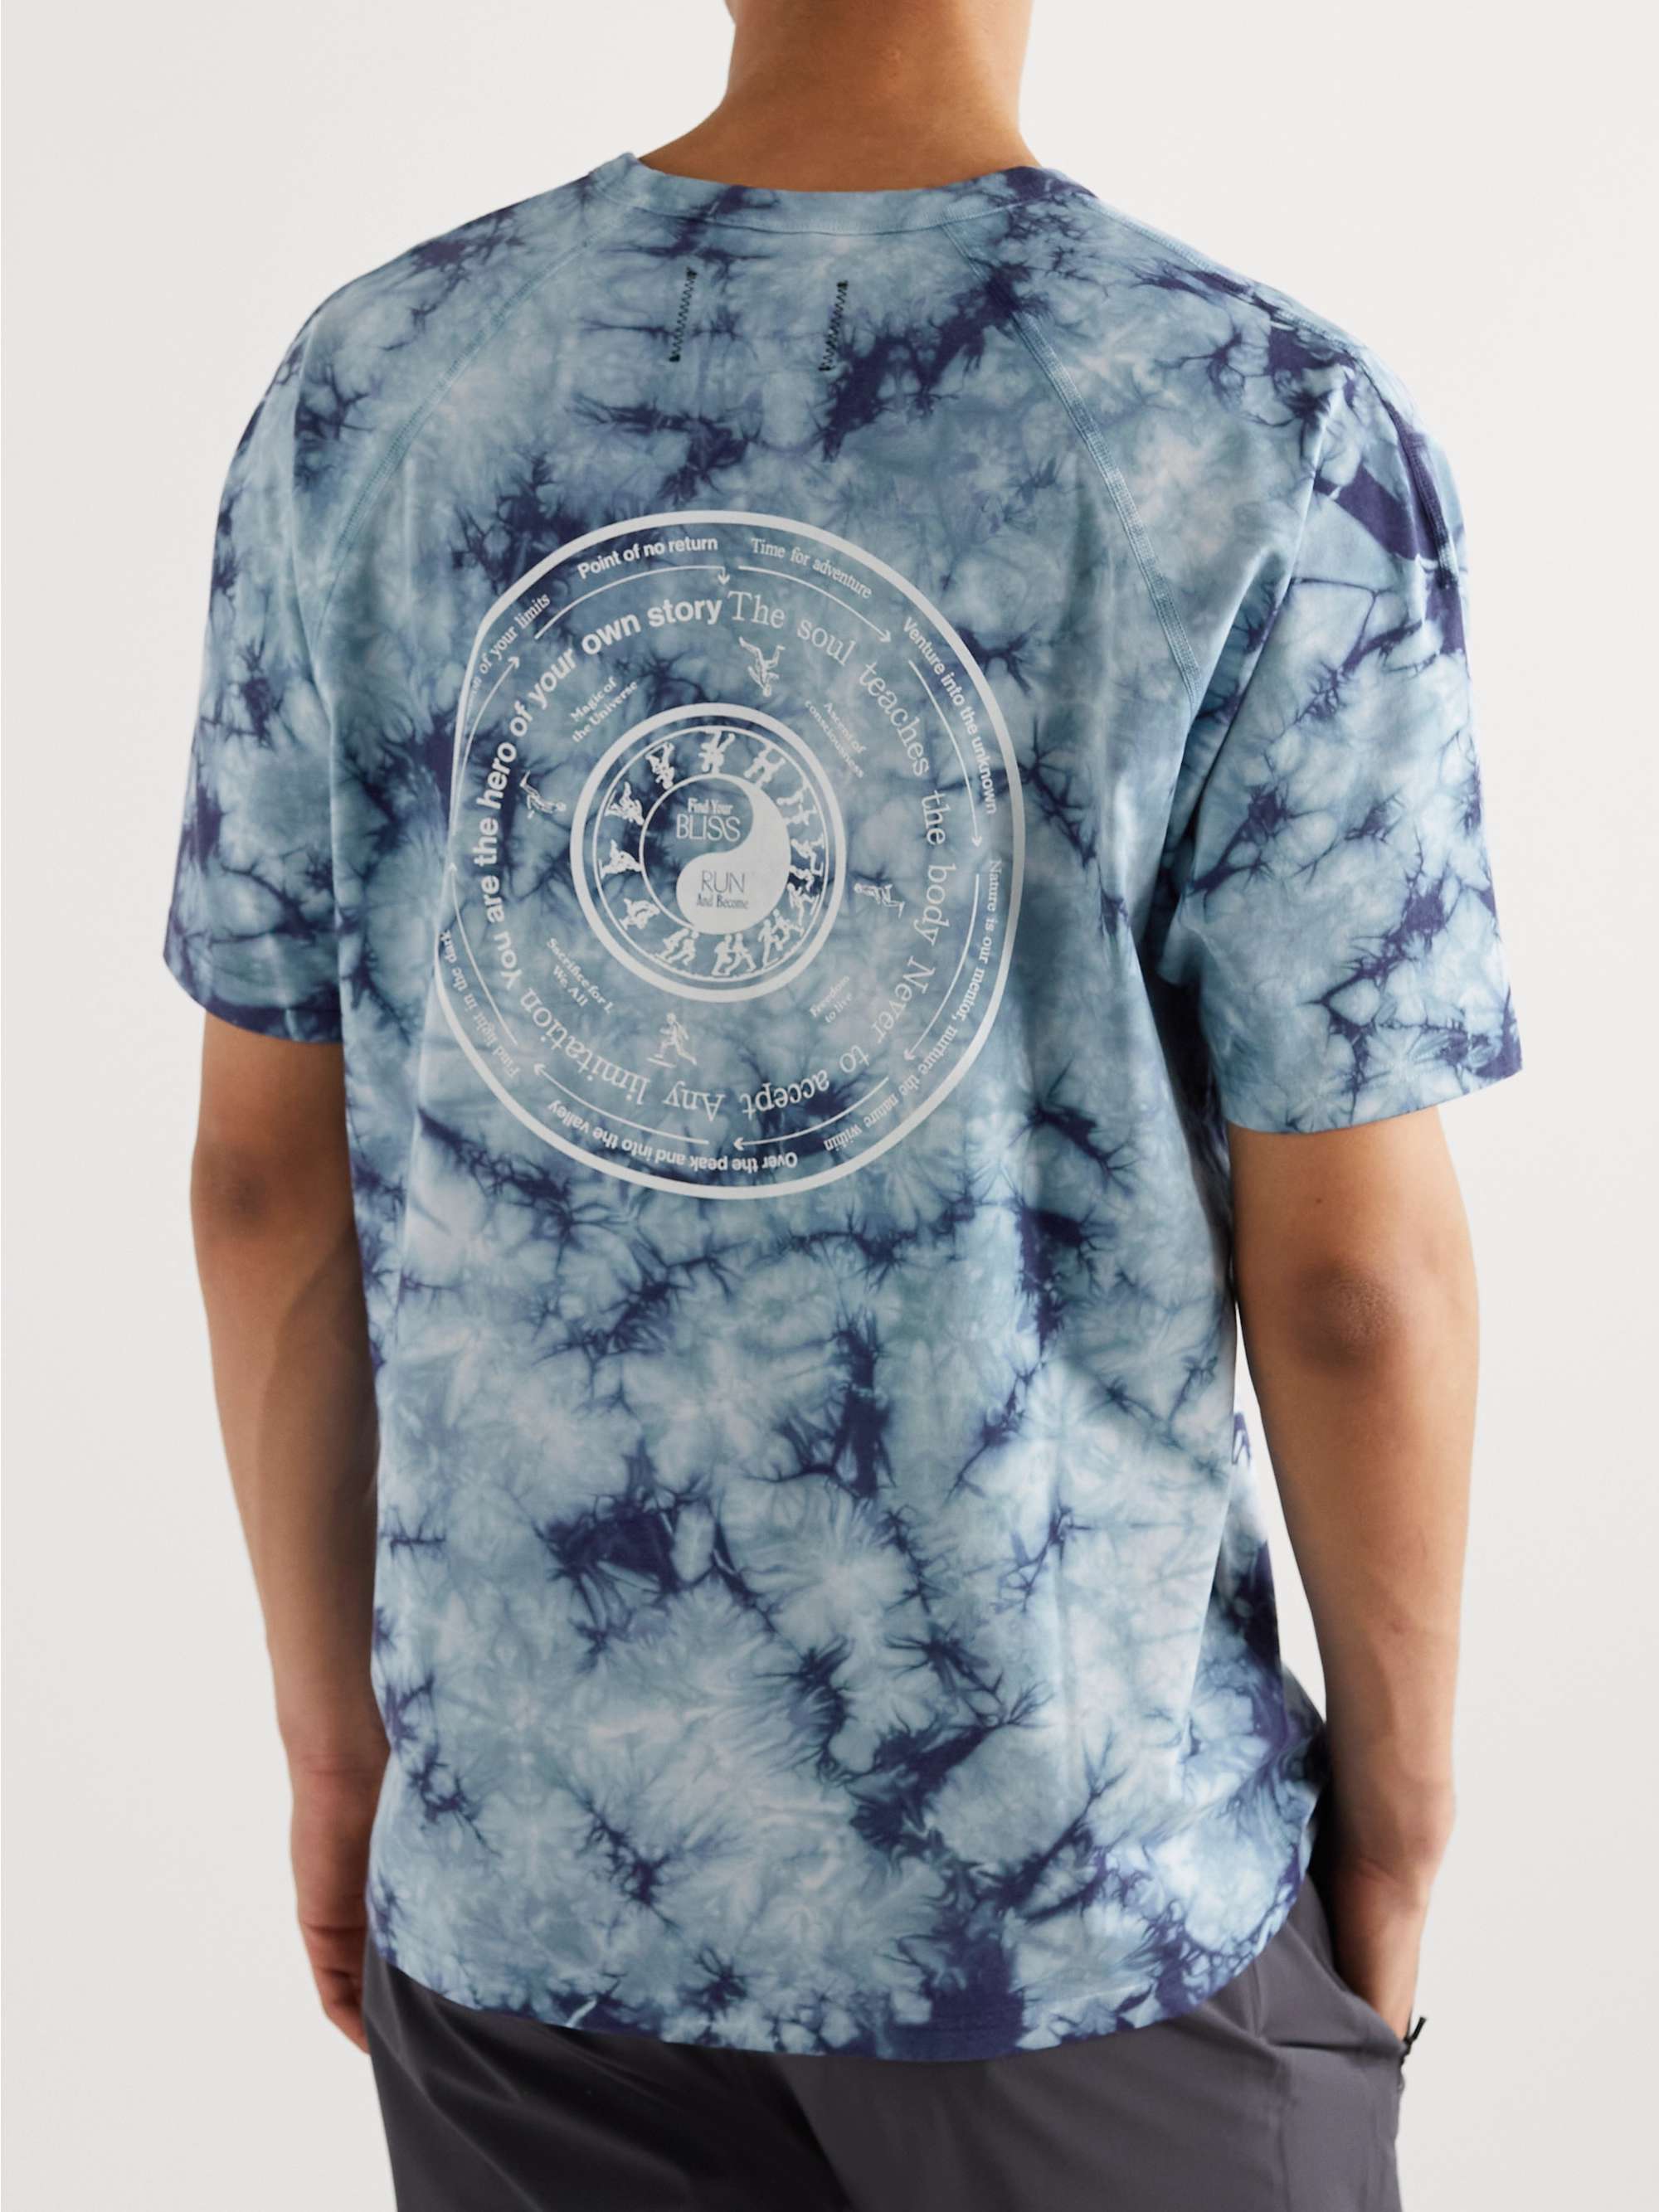 REIGNING CHAMP + Ryan Willms Printed Tie-Dyed Cotton-Blend Jersey T-Shirt